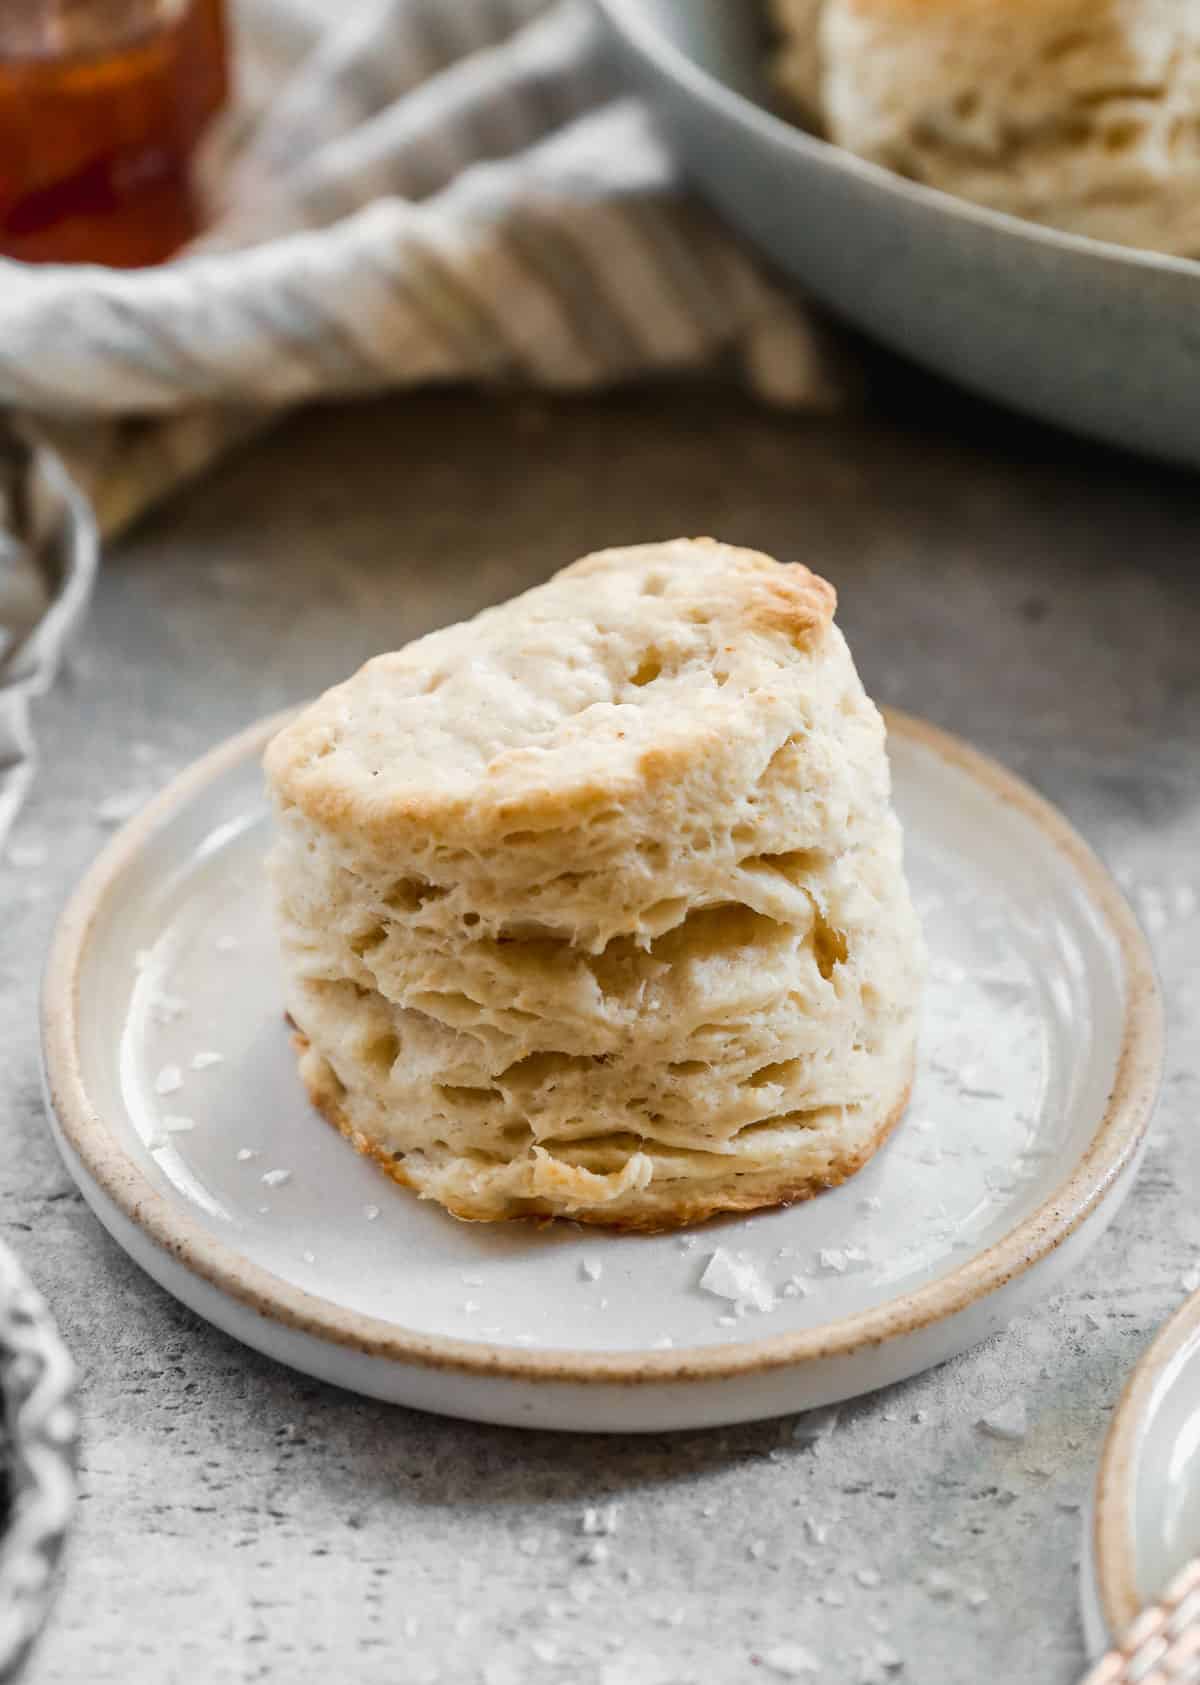 A flaky, homemade Buttermilk Biscuit on a small plate.